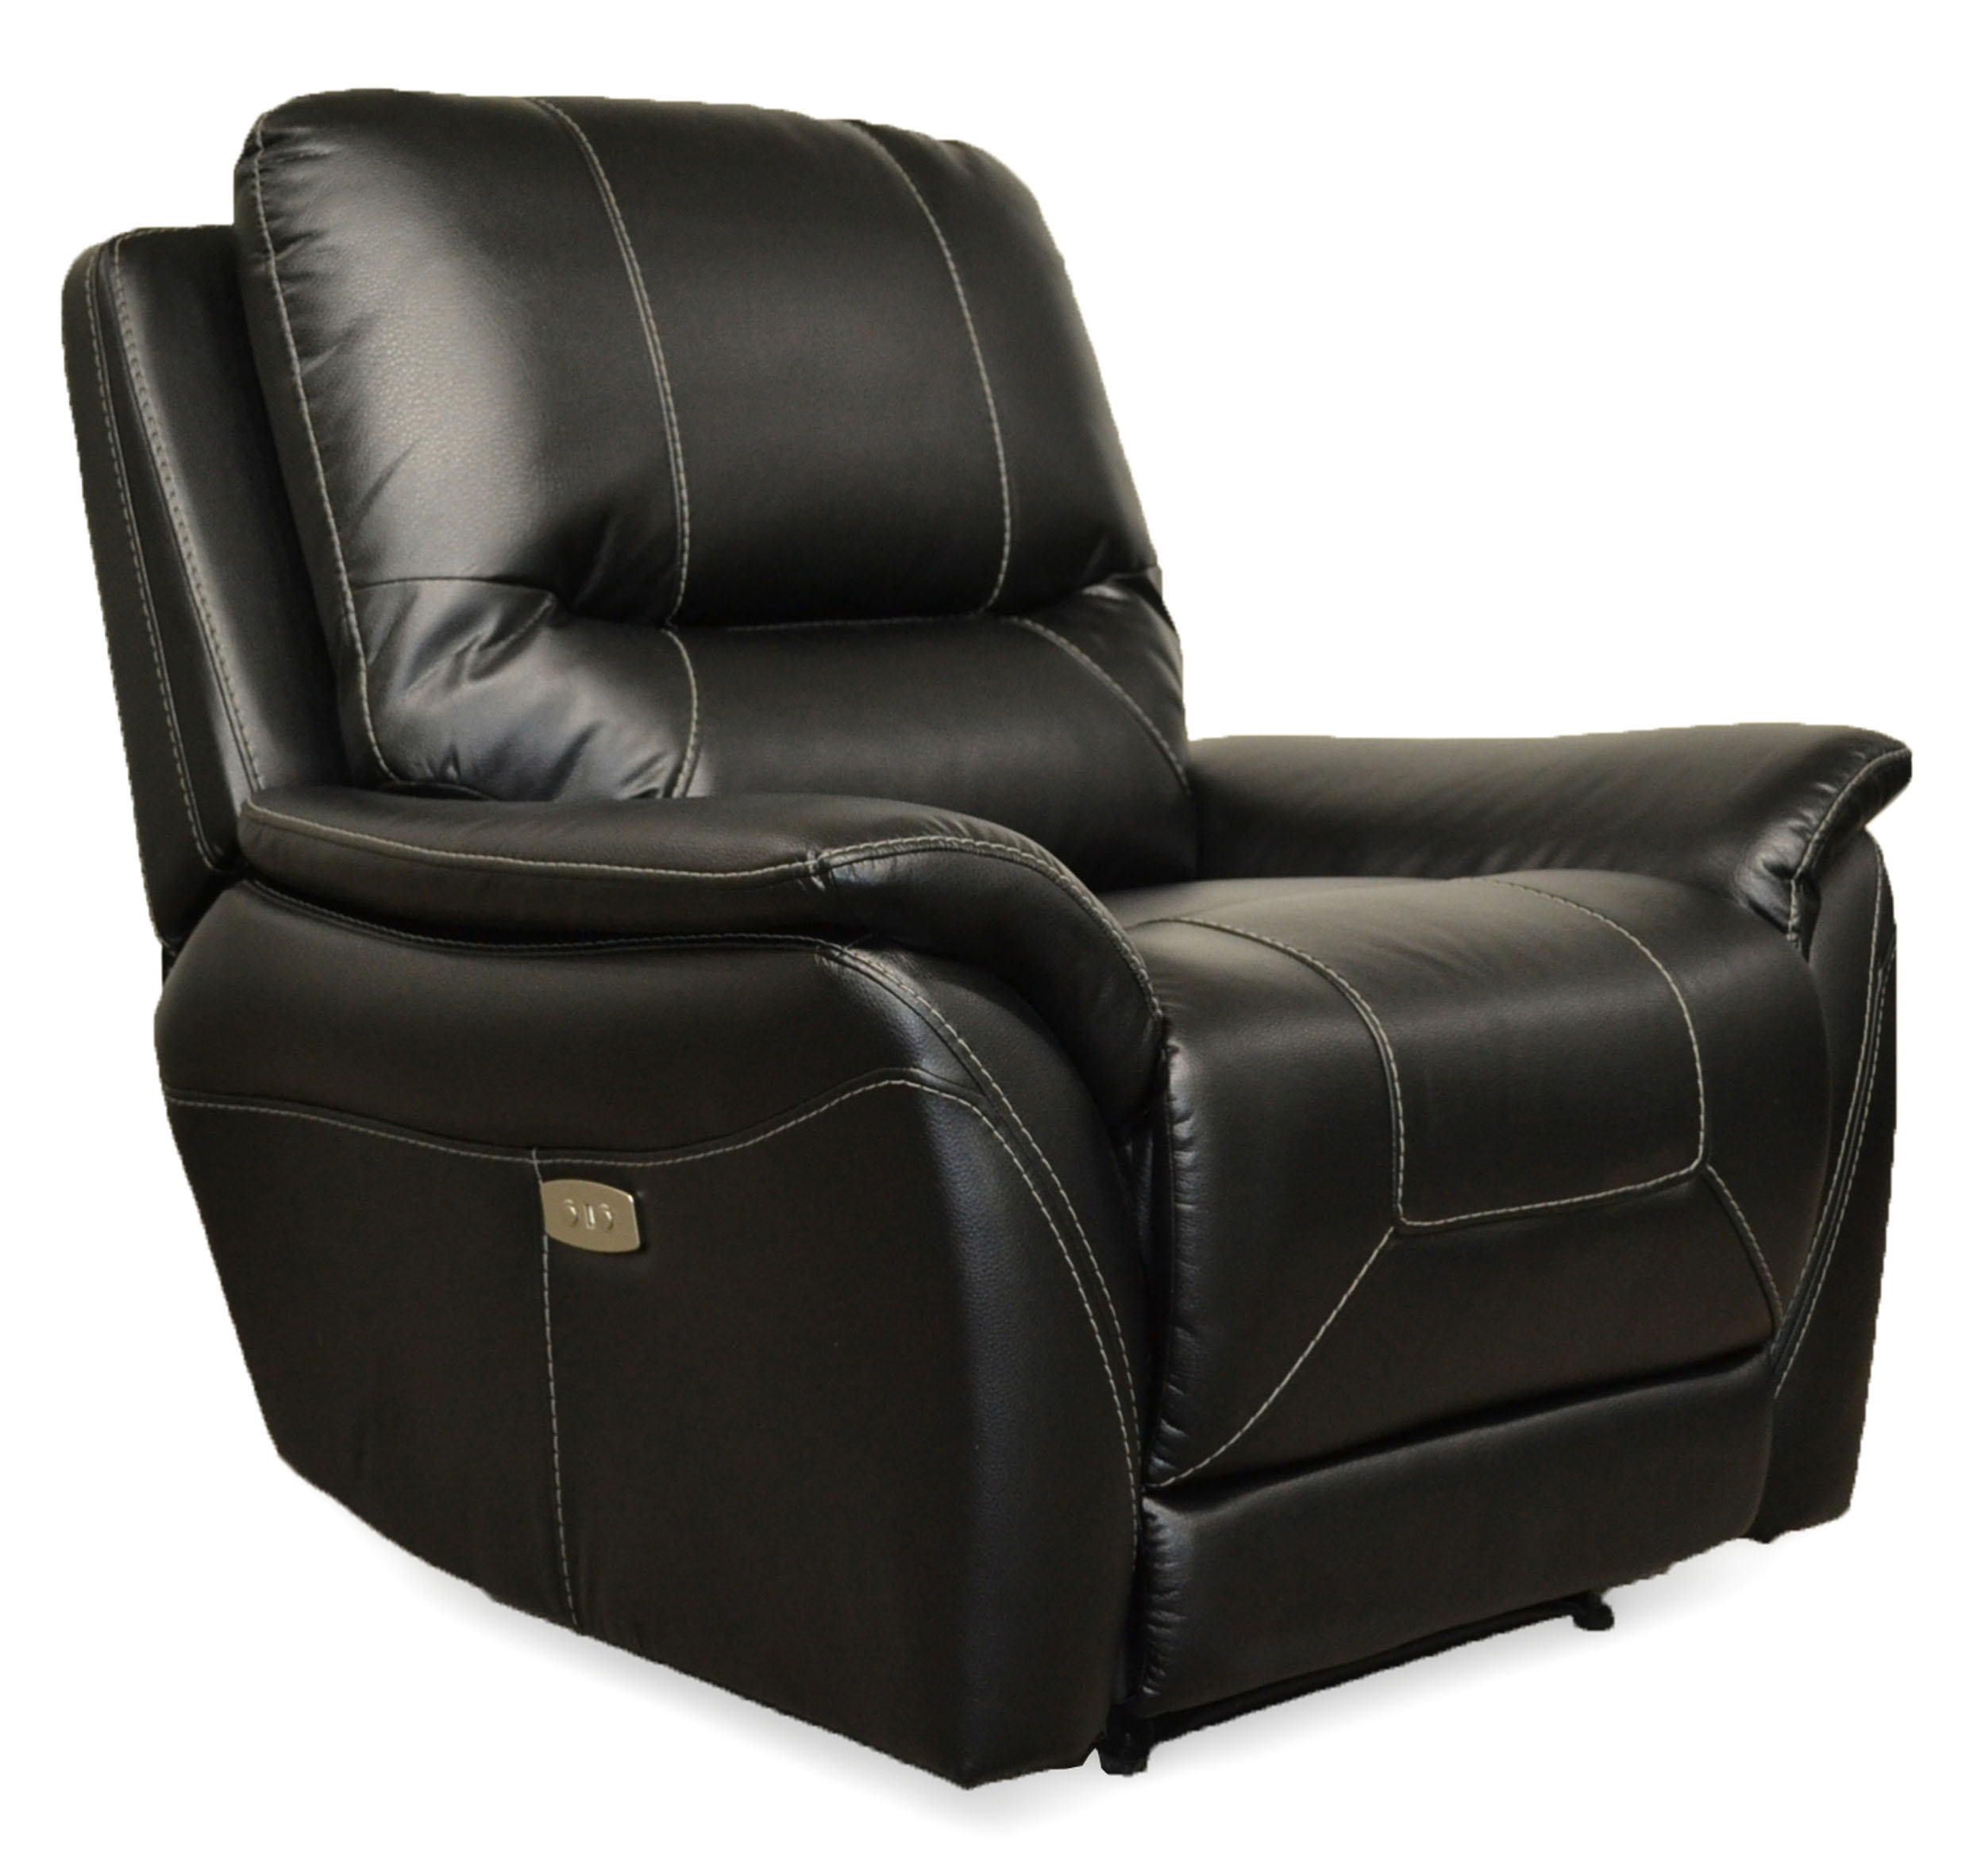 80123 Charcoal Power Recliner $599